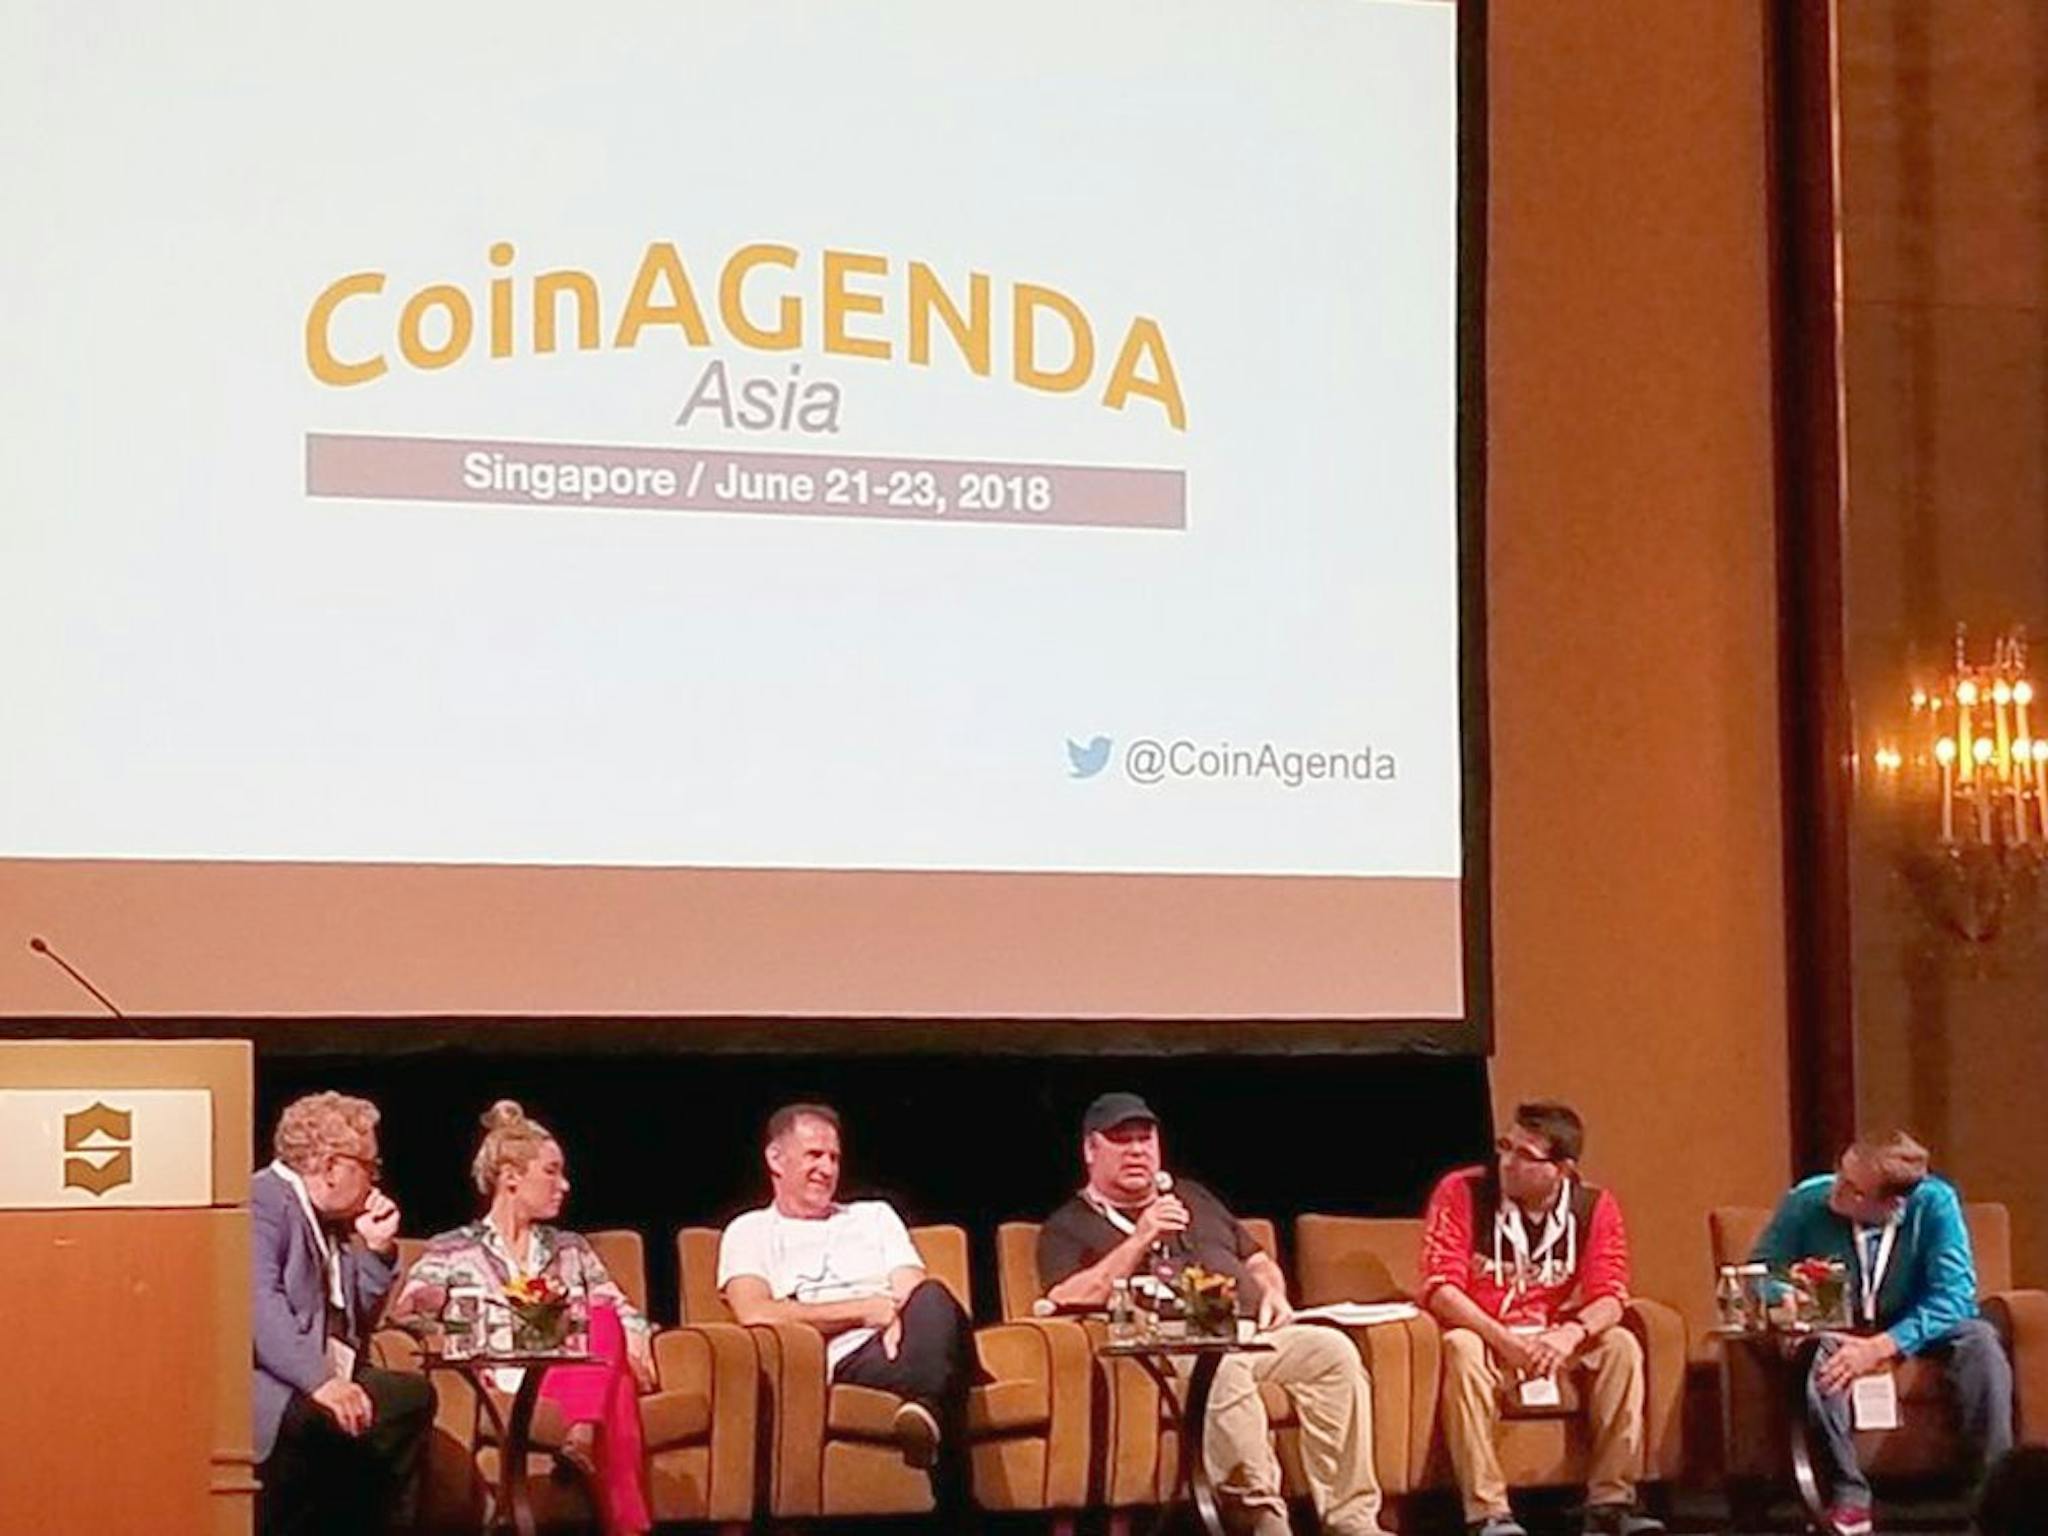 CoinAGENDA assets are being used with consent from Michael Terpin for HackerNoon Exclusive